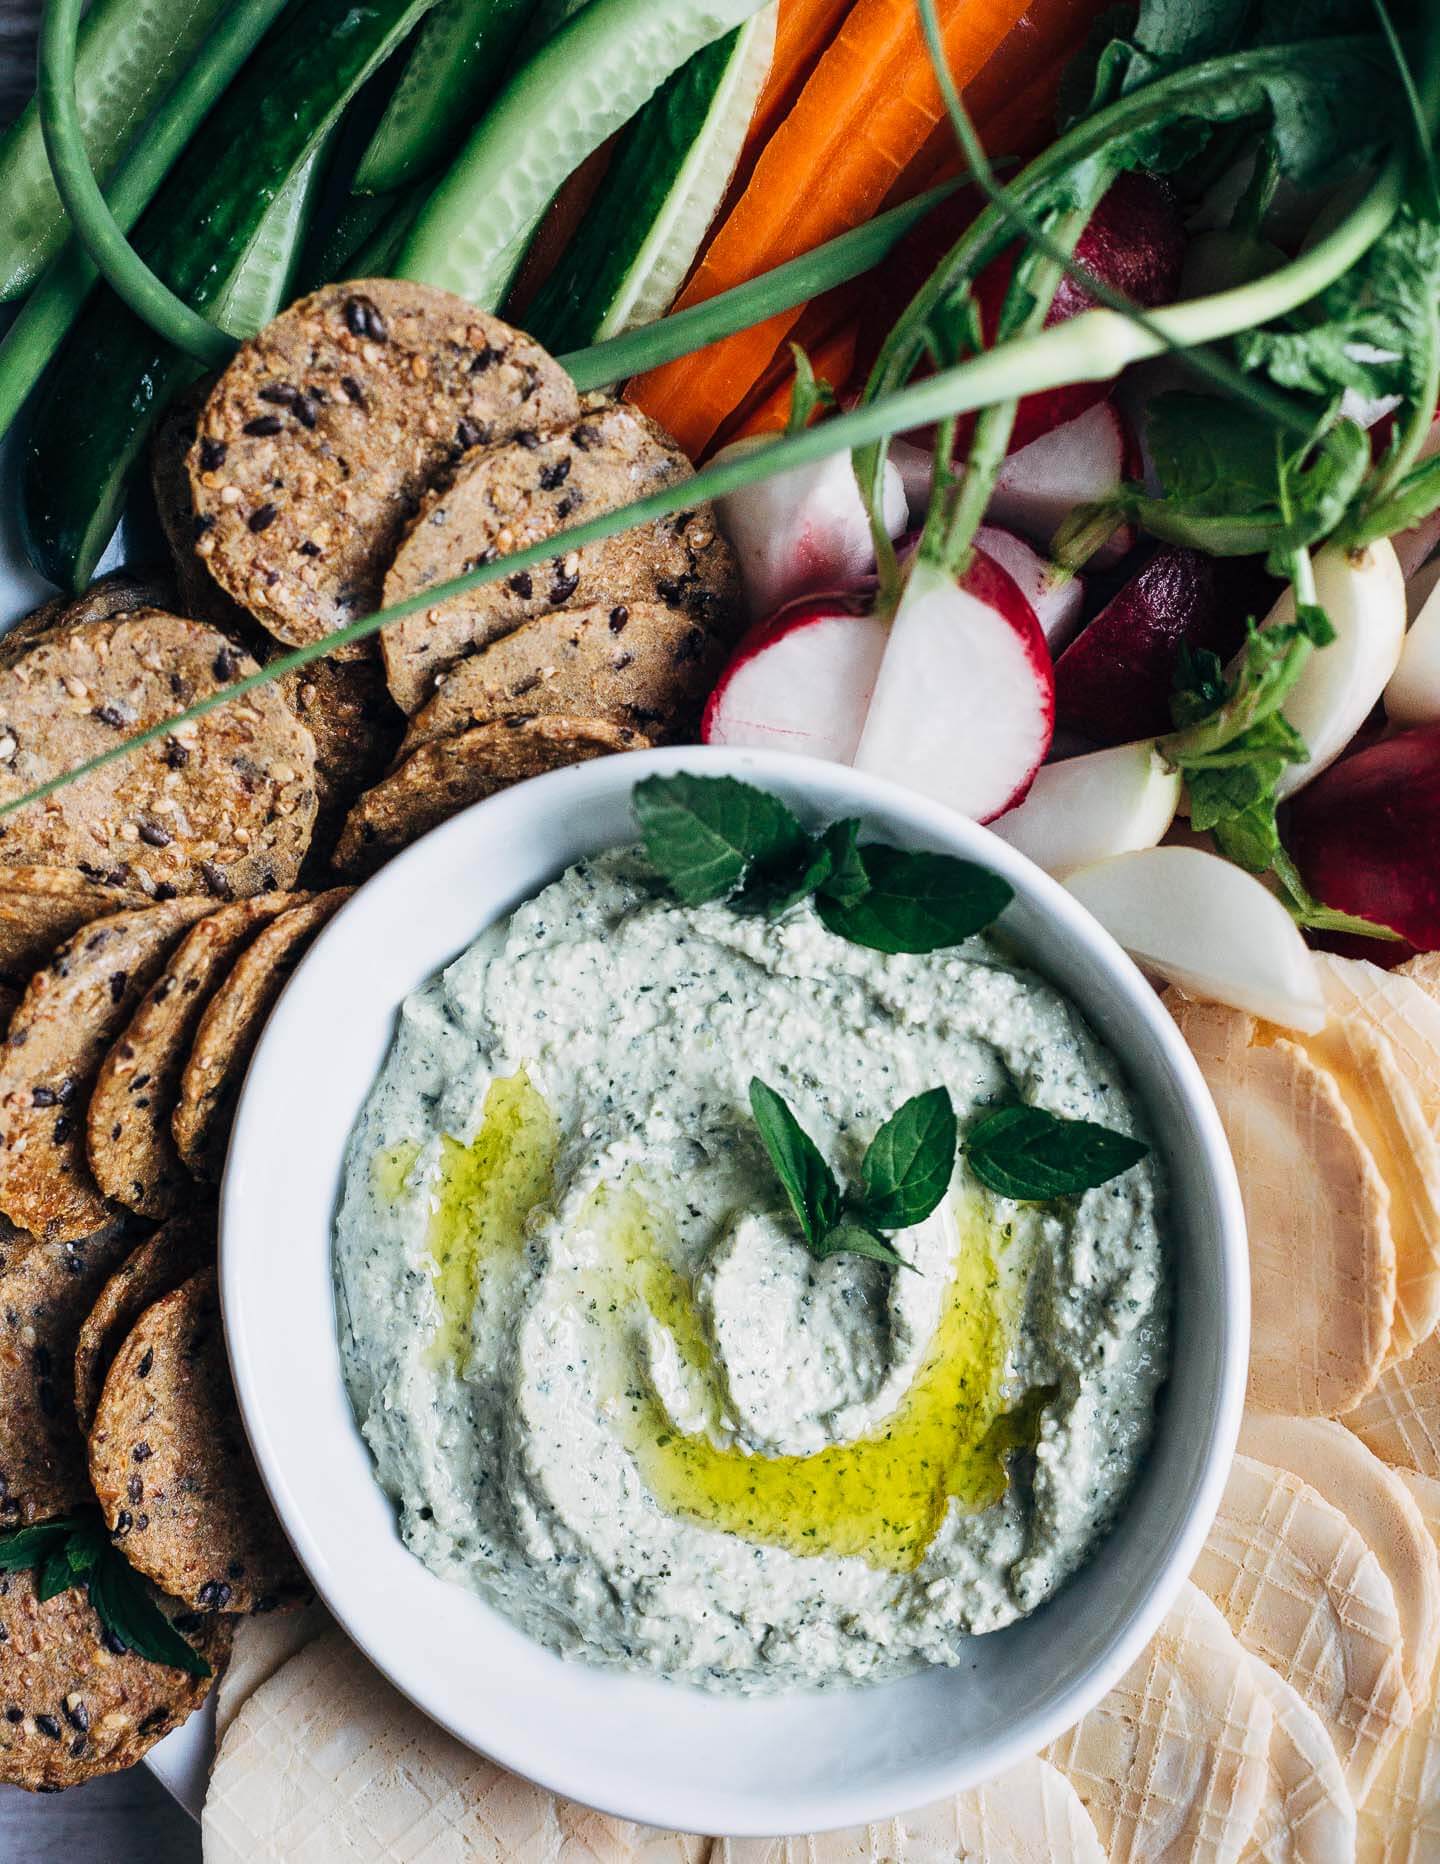 This lemony labneh and garlic scape dip is a wonderfully simple appetizer for warm weather fêtes. Creamy labneh, blended with sautéed garlic scapes, fresh mint leaves, and lemon zest, makes for a vibrant, crowd-pleasing dip.